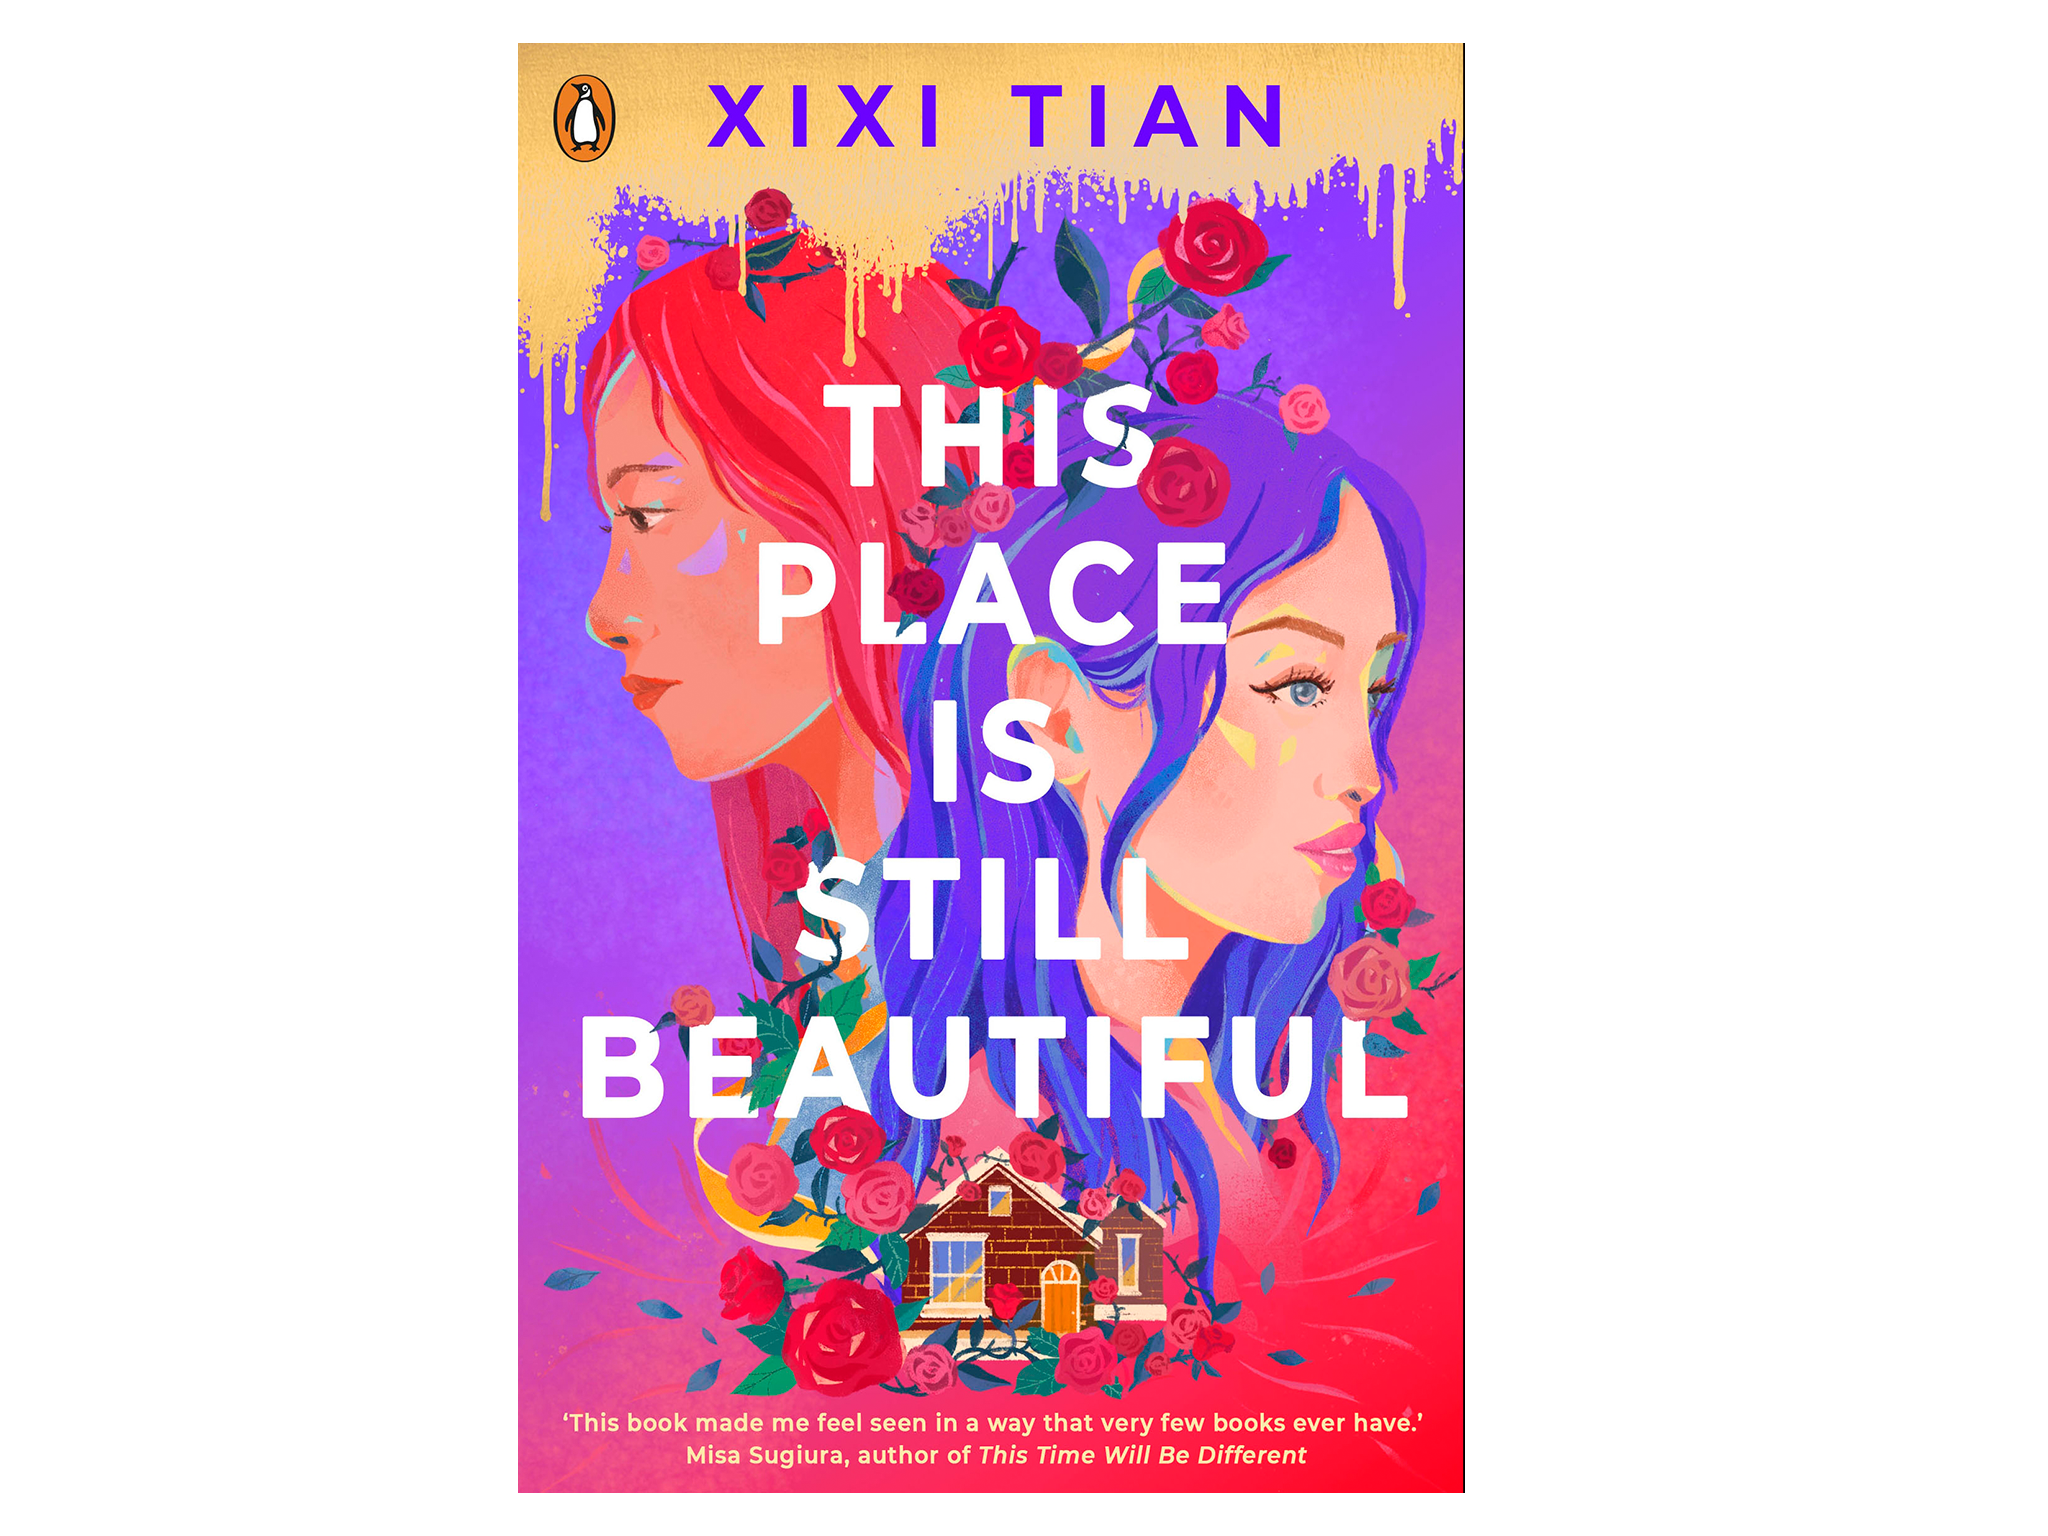 THis place is still beautiful by XiXi Tian